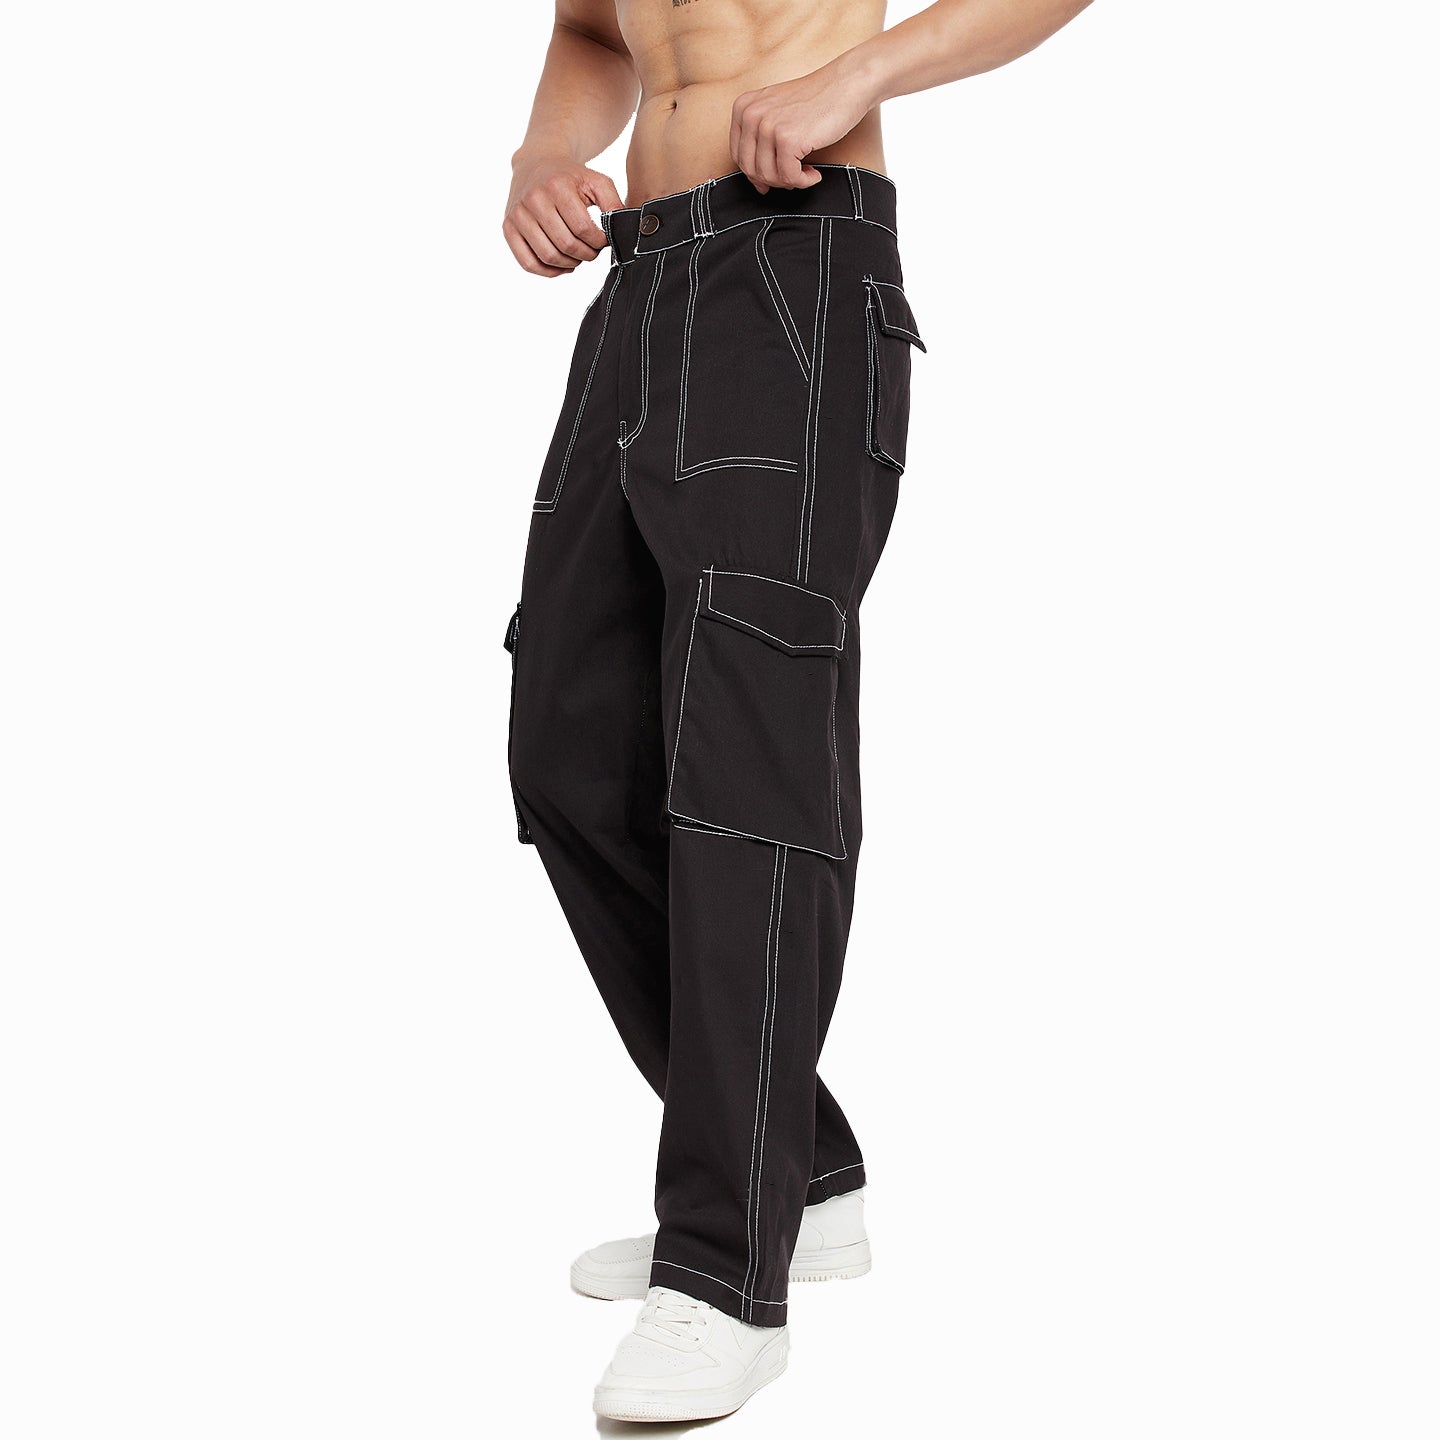 chef trousers  Chef pants  chef trousers supplier in delhi  chef trousers  manufacturer in delhi  chef trousers dealerin delhi